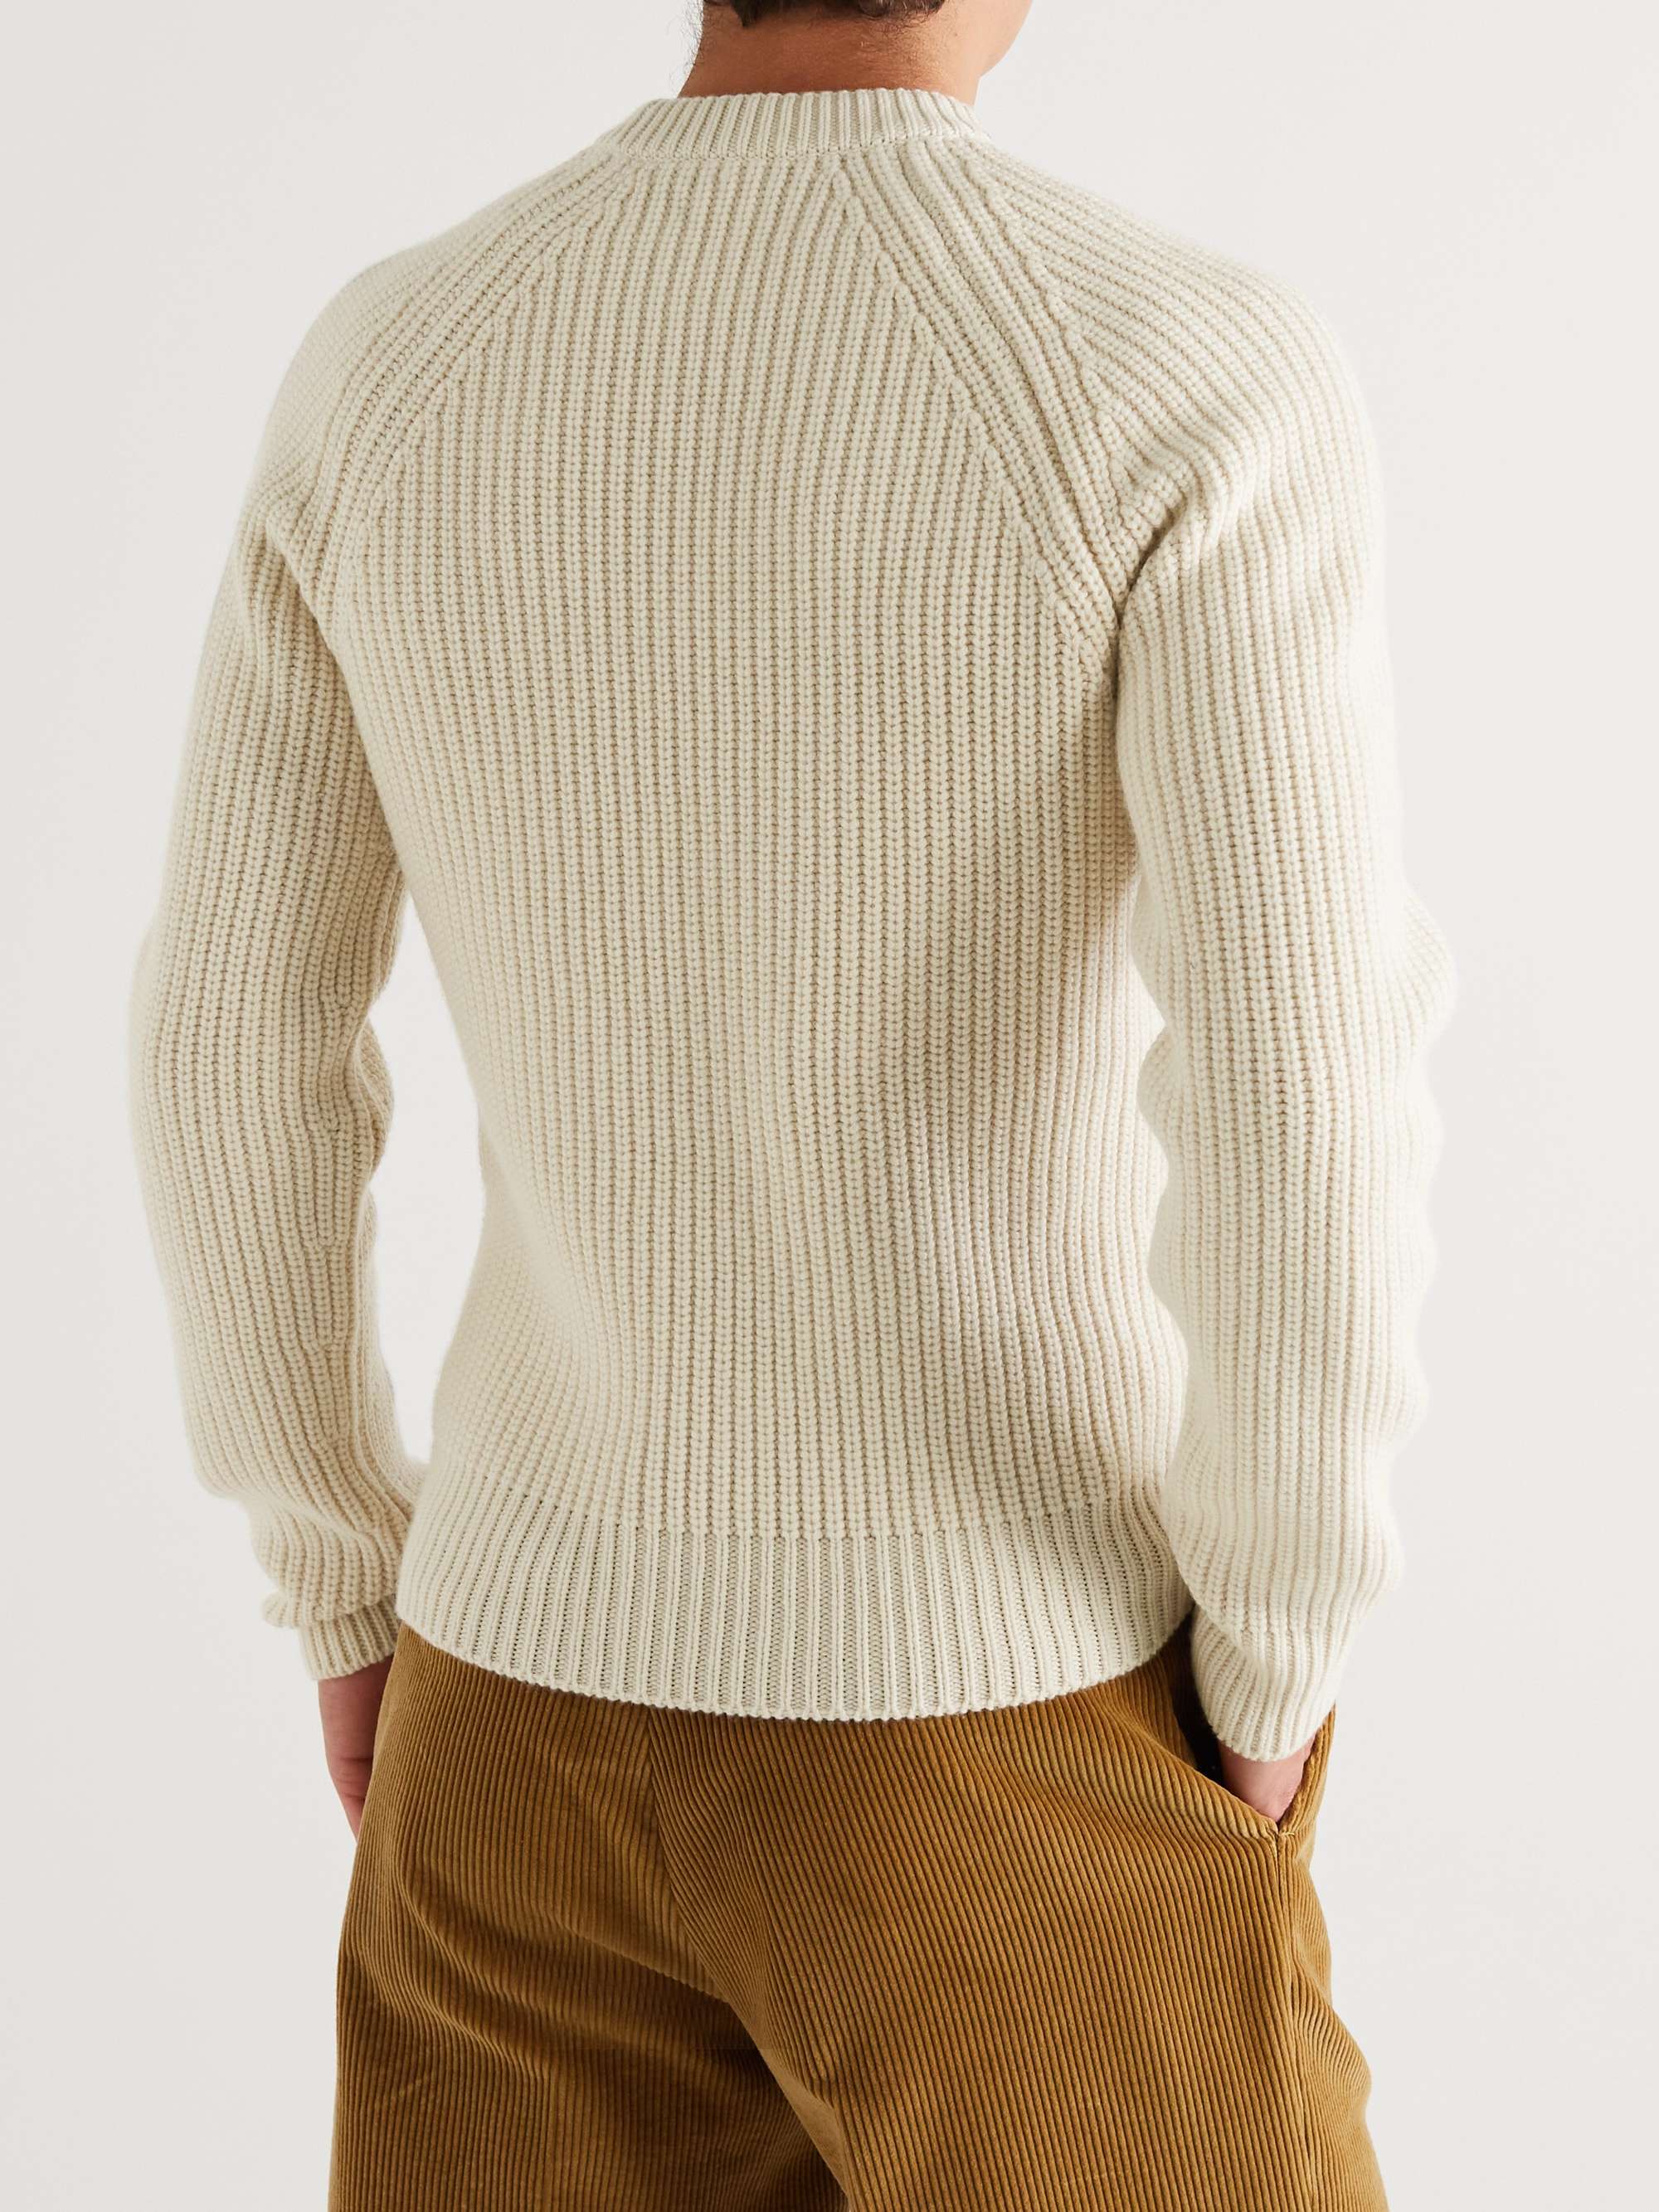 TOM FORD Ribbed Cashmere Mock-Neck Sweater